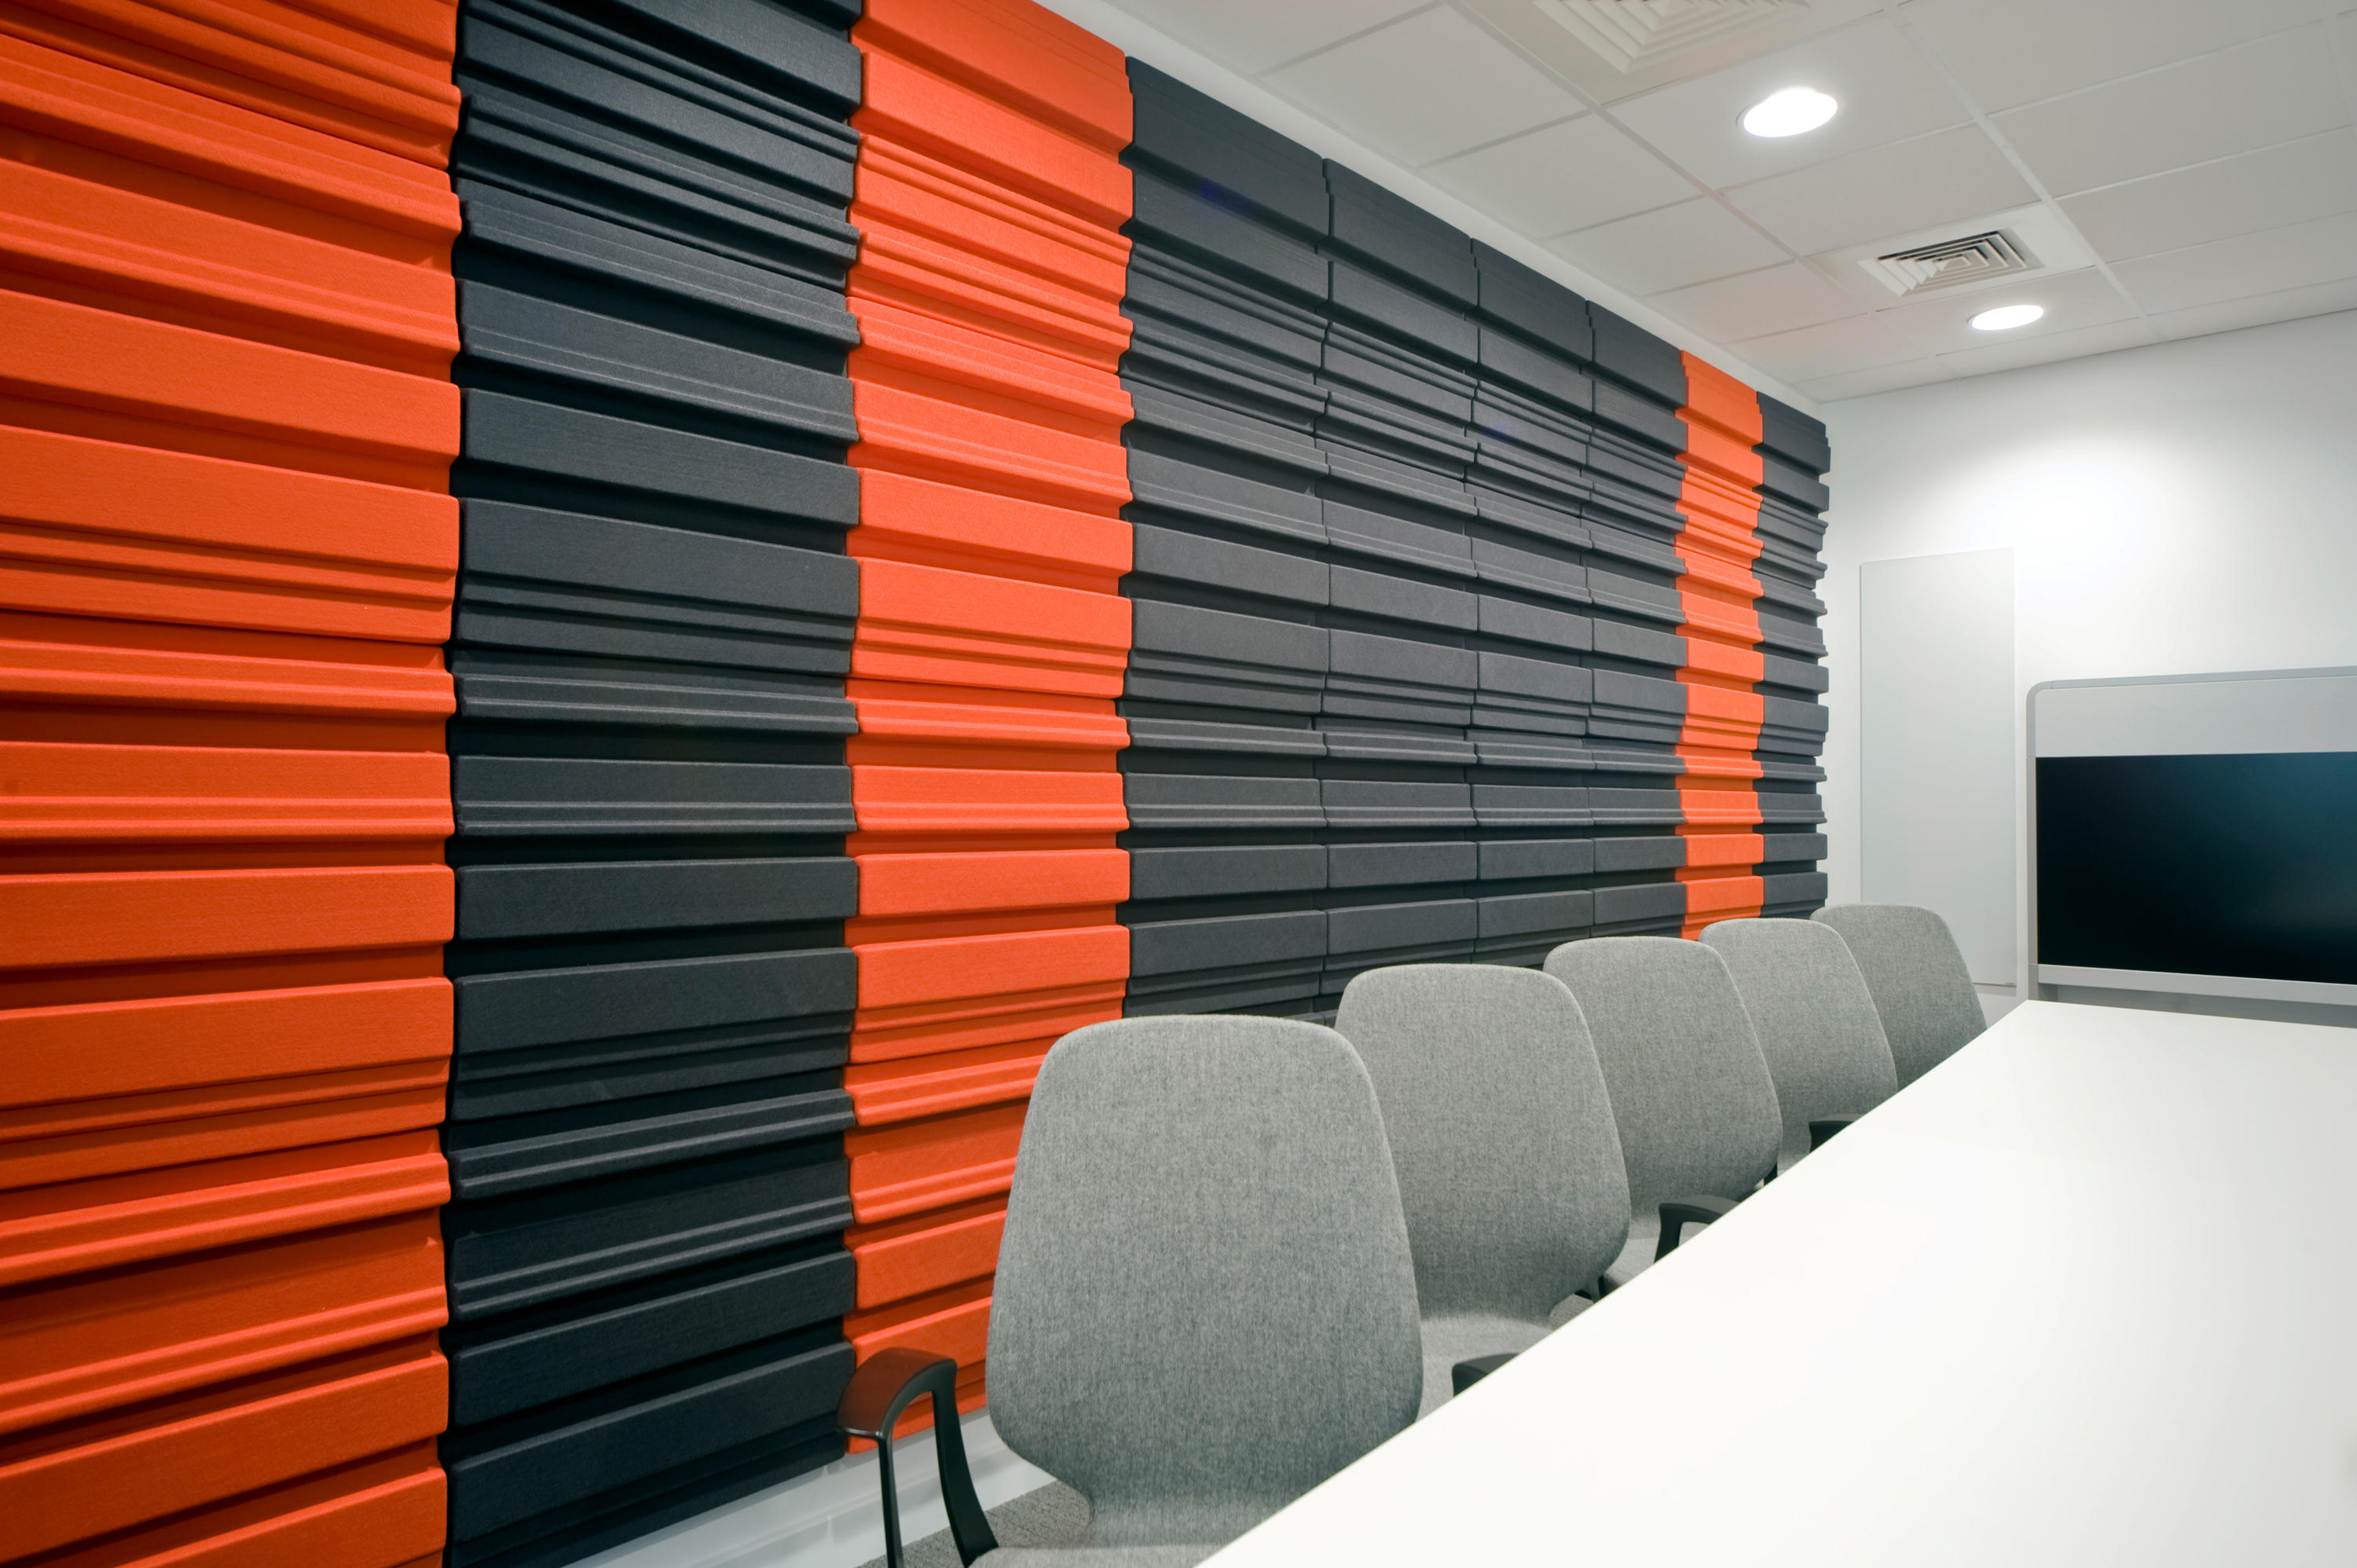 FOREST - Sound absorbing wall systems from Soundtect | Architonic